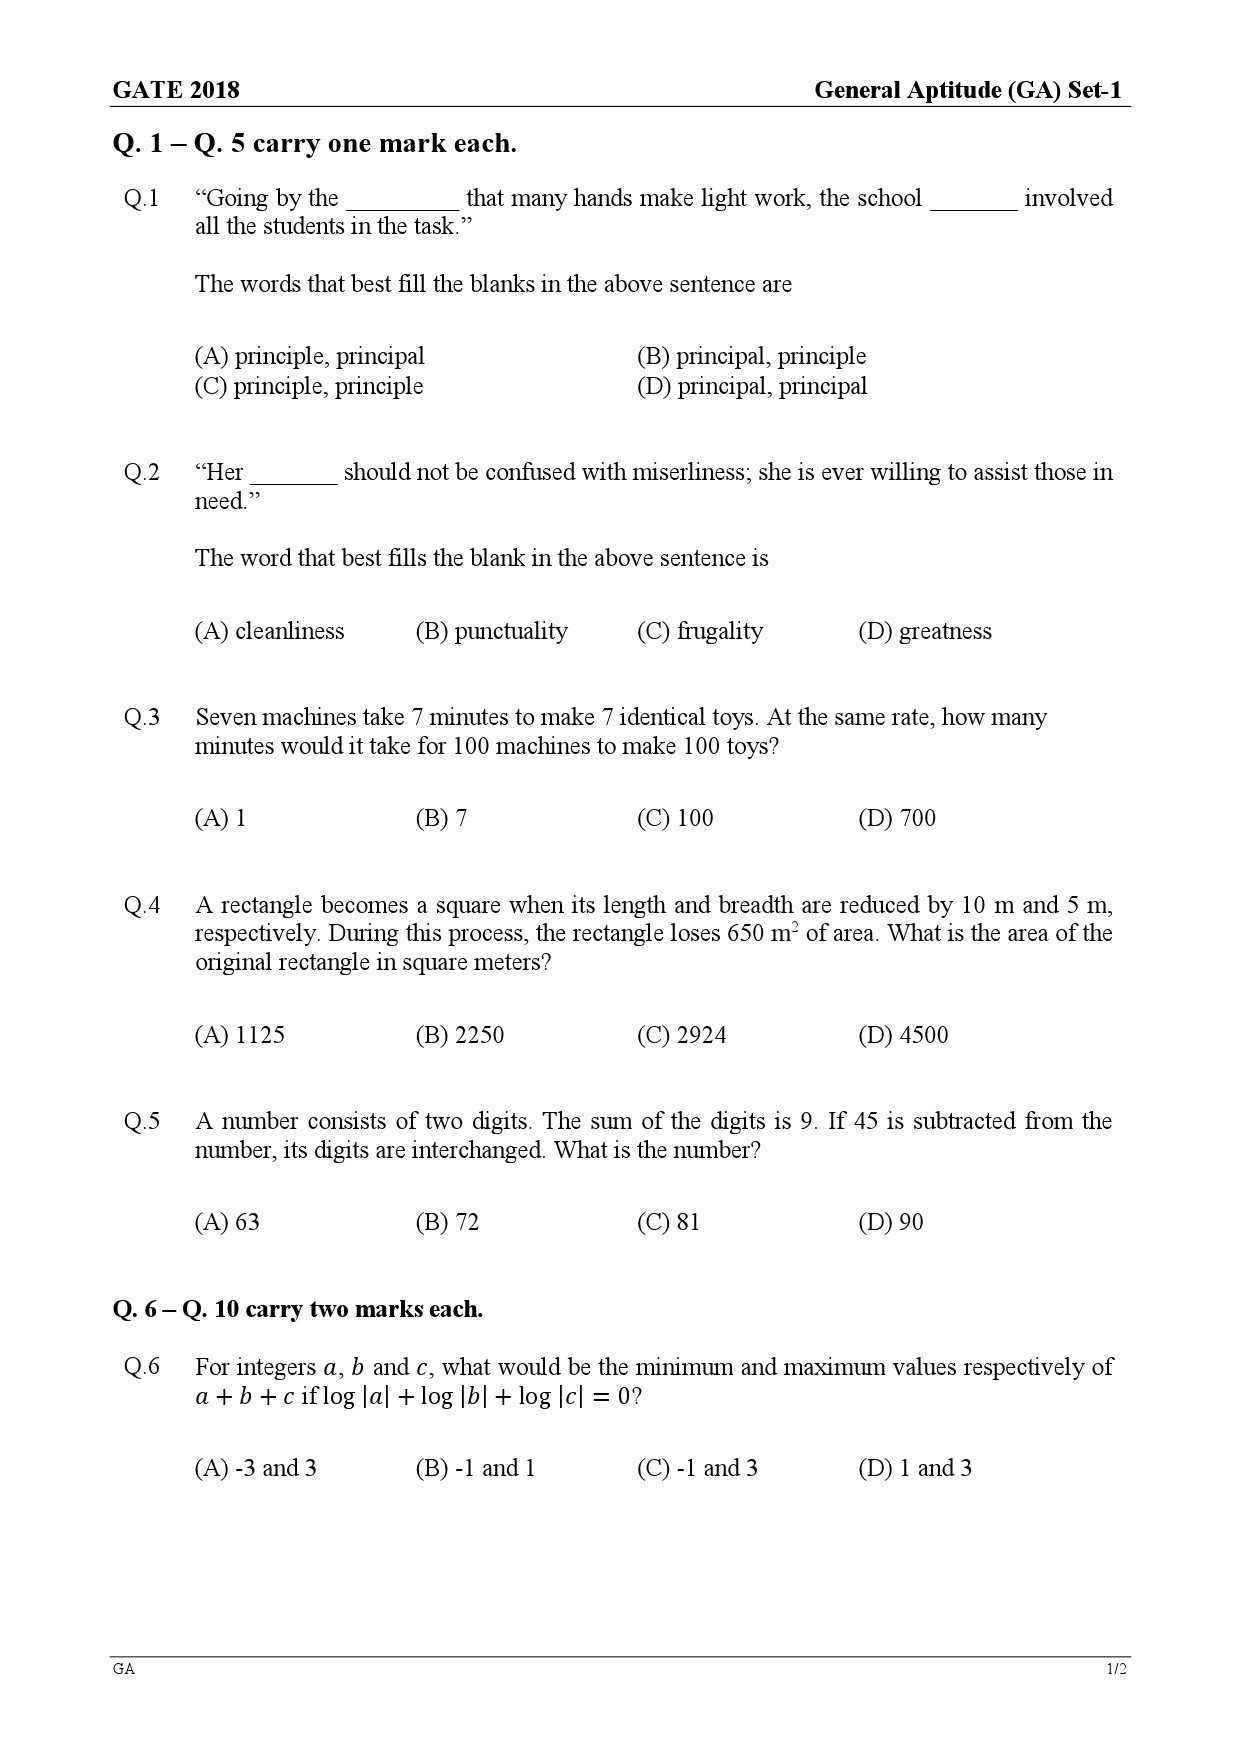 GATE Exam Question Paper 2018 Engineering Sciences 1